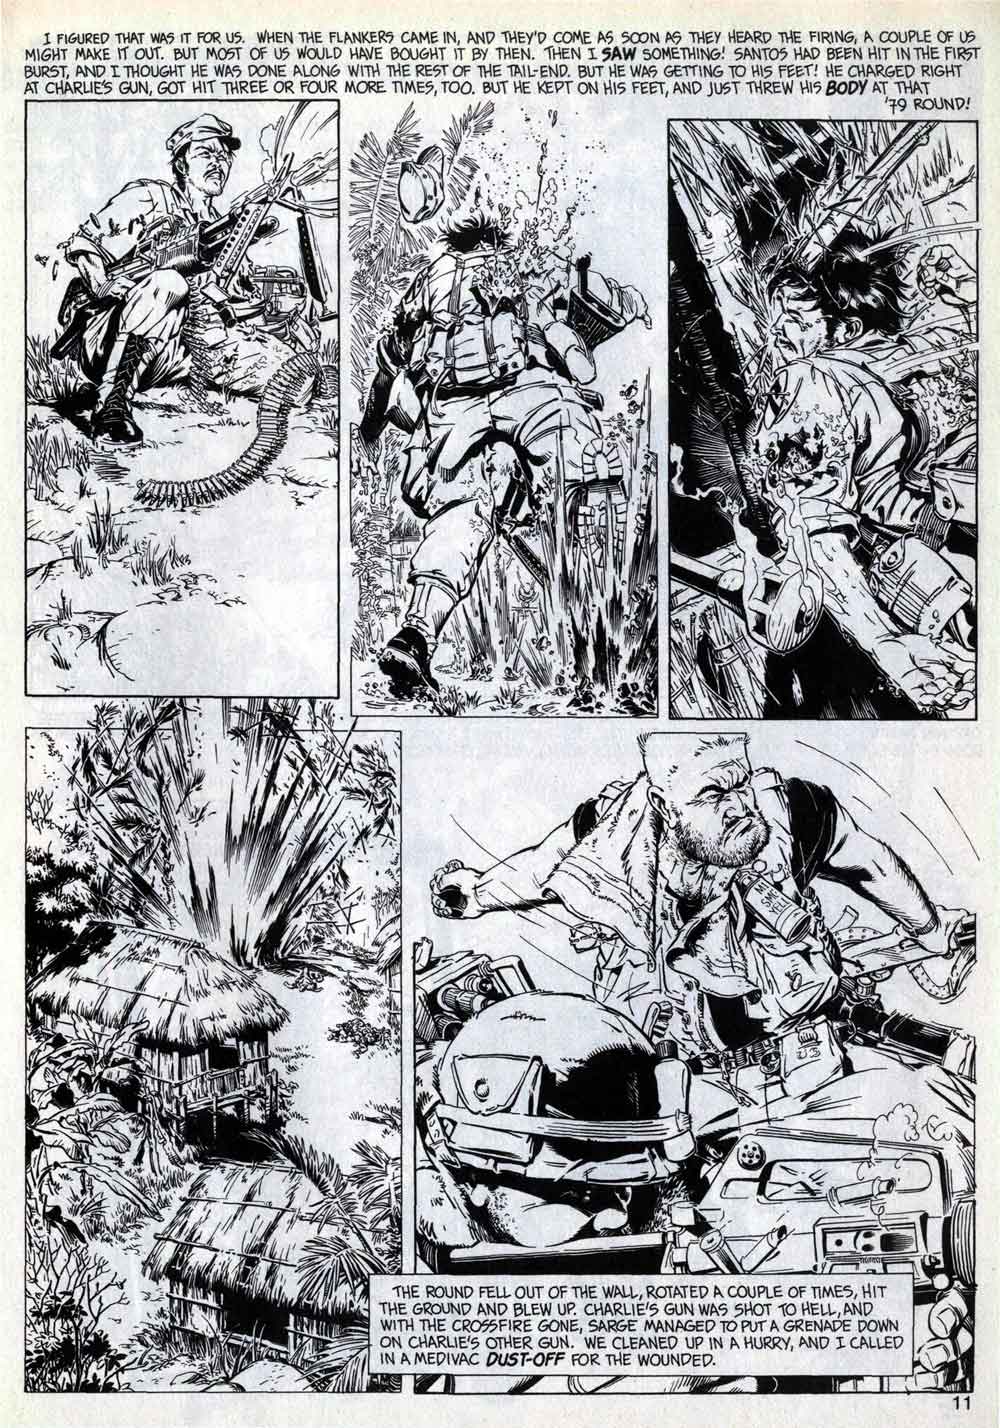 SAVAGE TALES #1 featuring The Nam, 1967… "5th To The 1st" by Doug Murray and Michael Golden